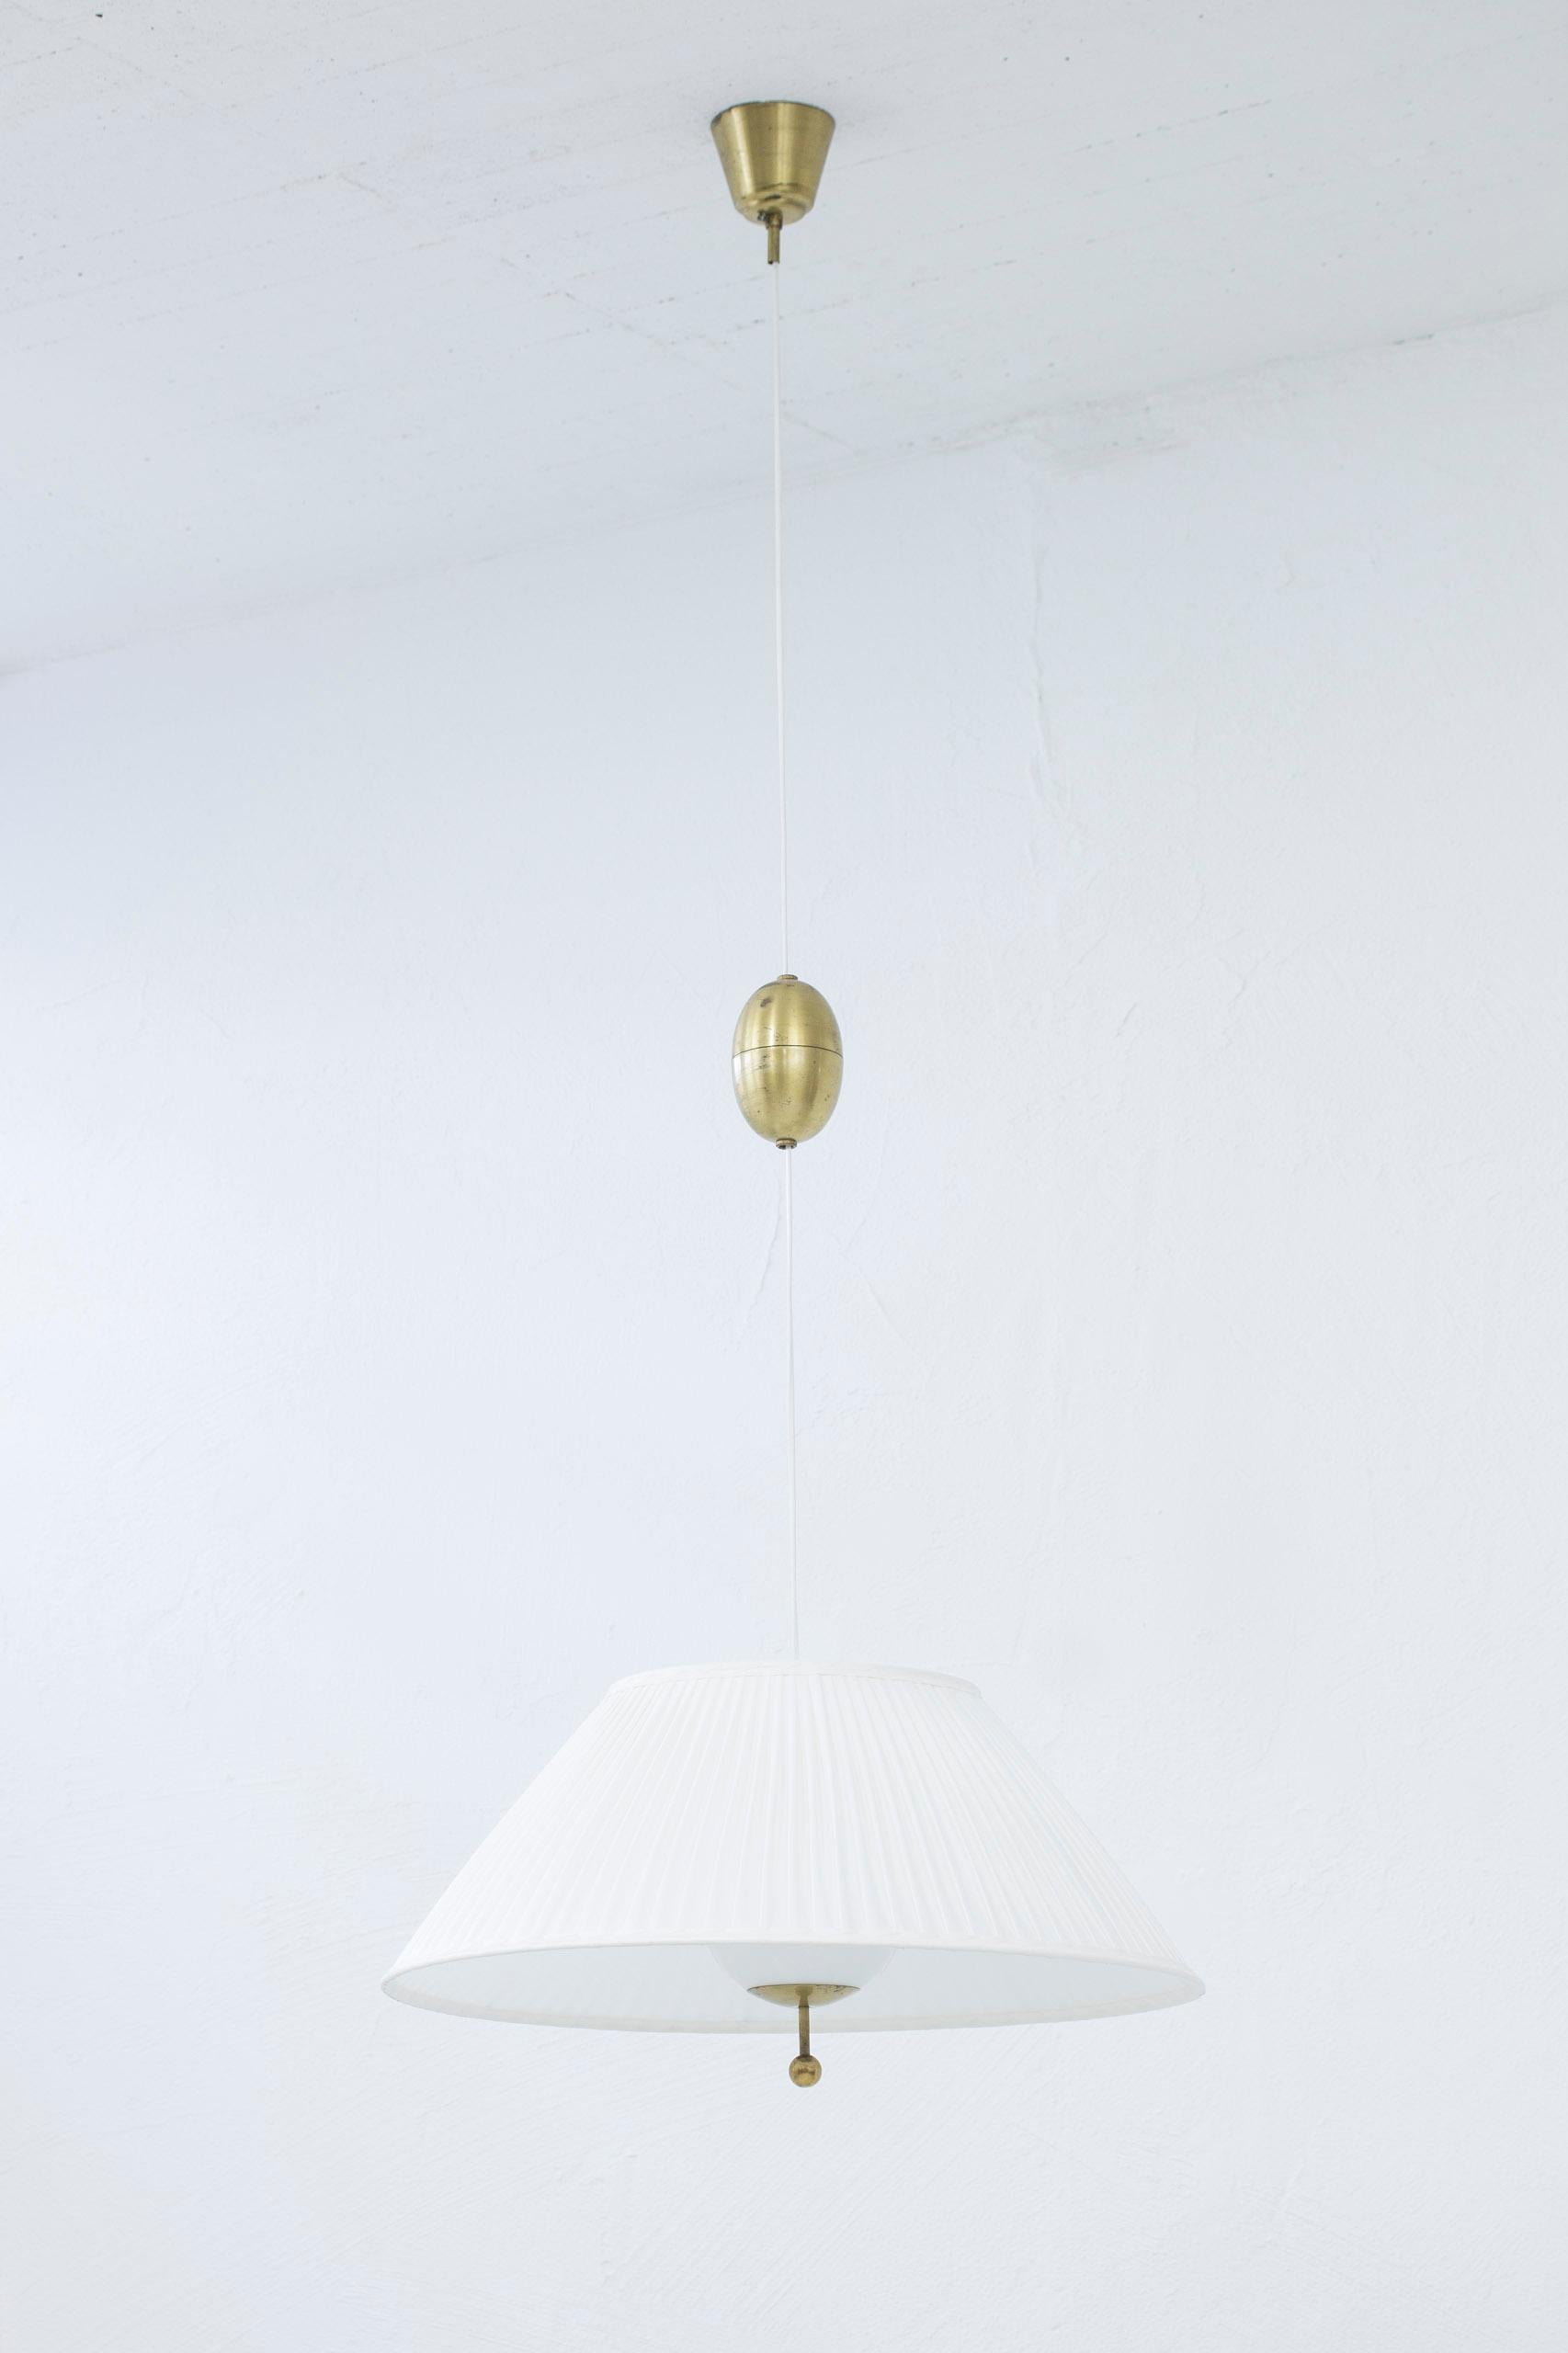 Ceiling lamp designed by Harald Notini. Produced in Sweden by Böhlmarks lampfabrik during the 1940s. Made from Opal glass with a hand pleated shade resting on the glass. Ceiling mount, pulley and grip all in brass. The lamp extends from 120-175 cm